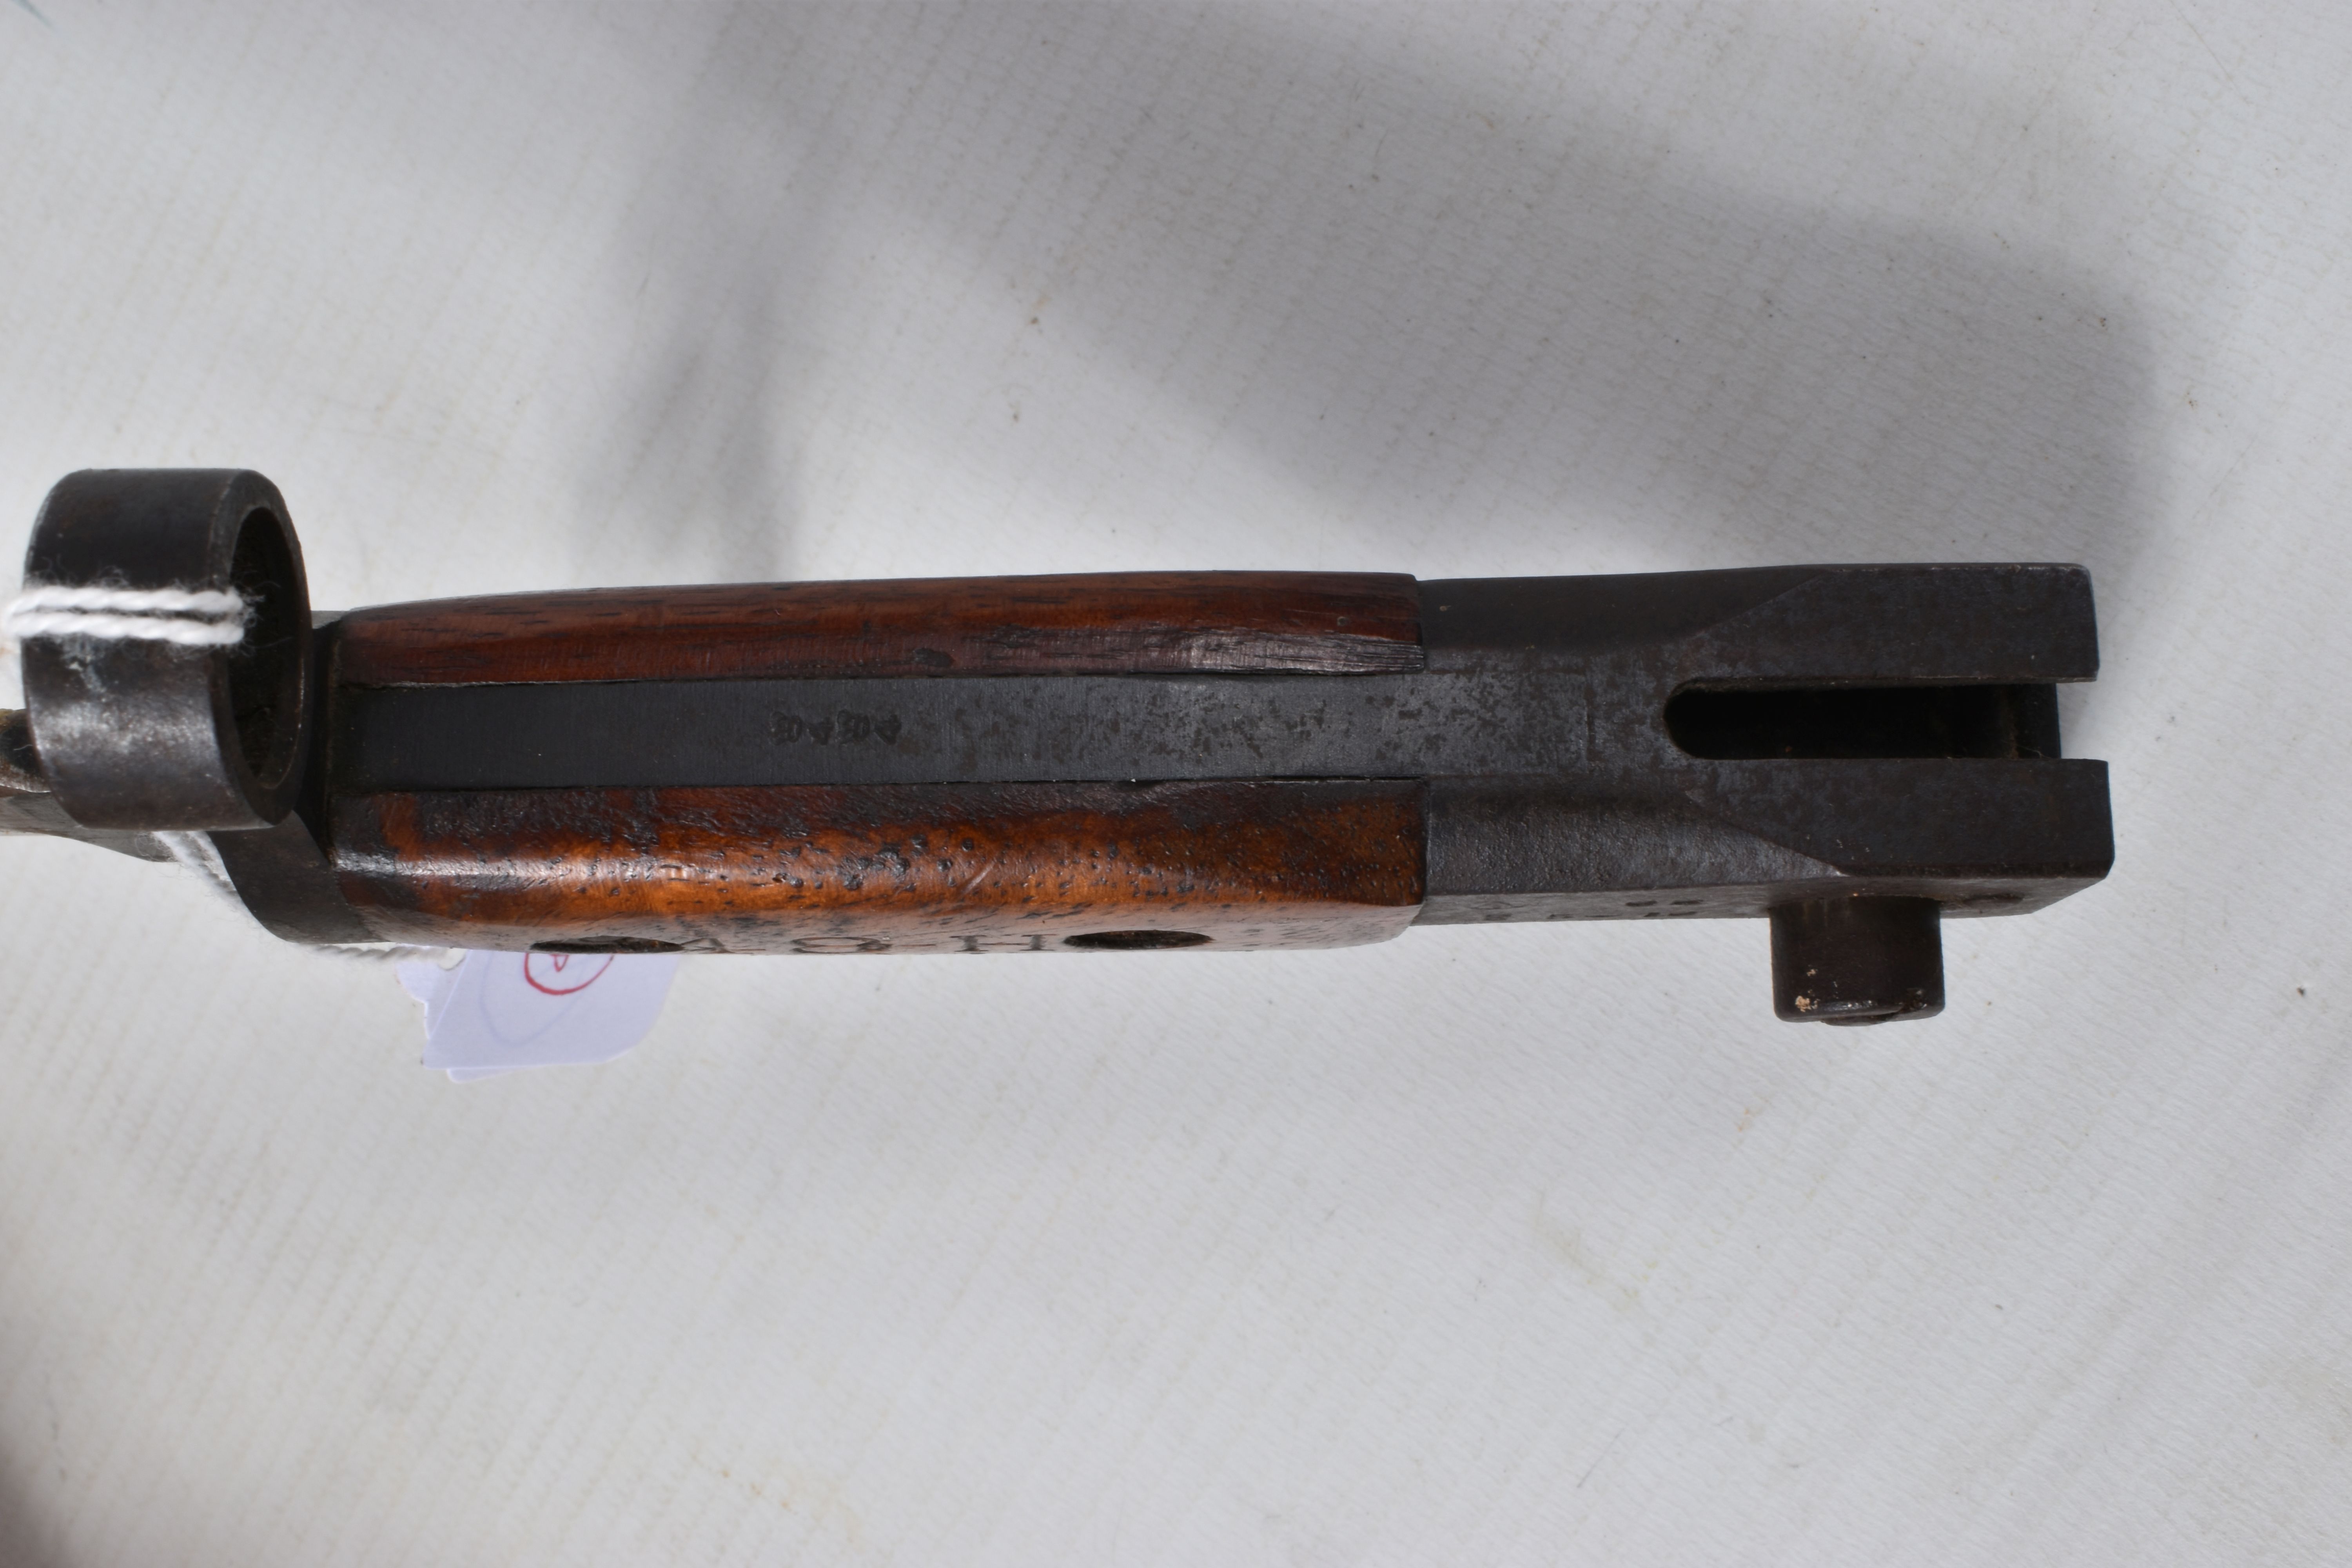 A 1907 PATTERN CANADIAN ROSS RIFLE BAYONET, the blade us unmarked but the handle has 48-H on one - Image 14 of 16